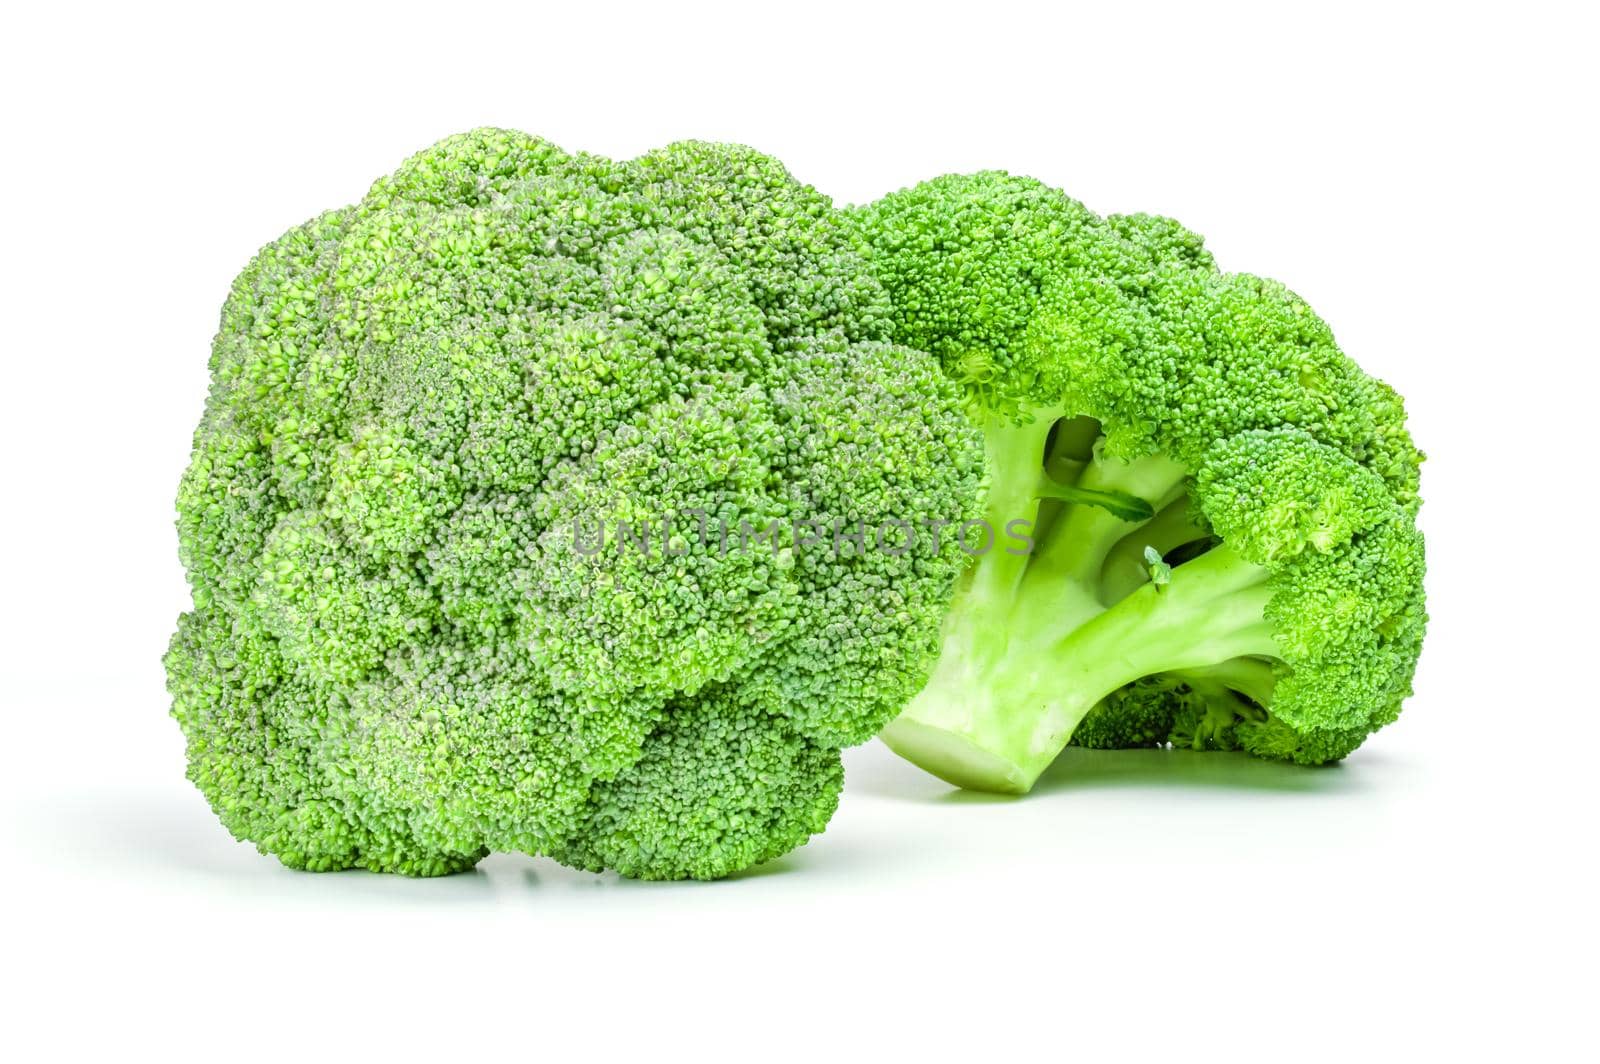 Two ripe broccoli cabbage isolated on white background cutout.